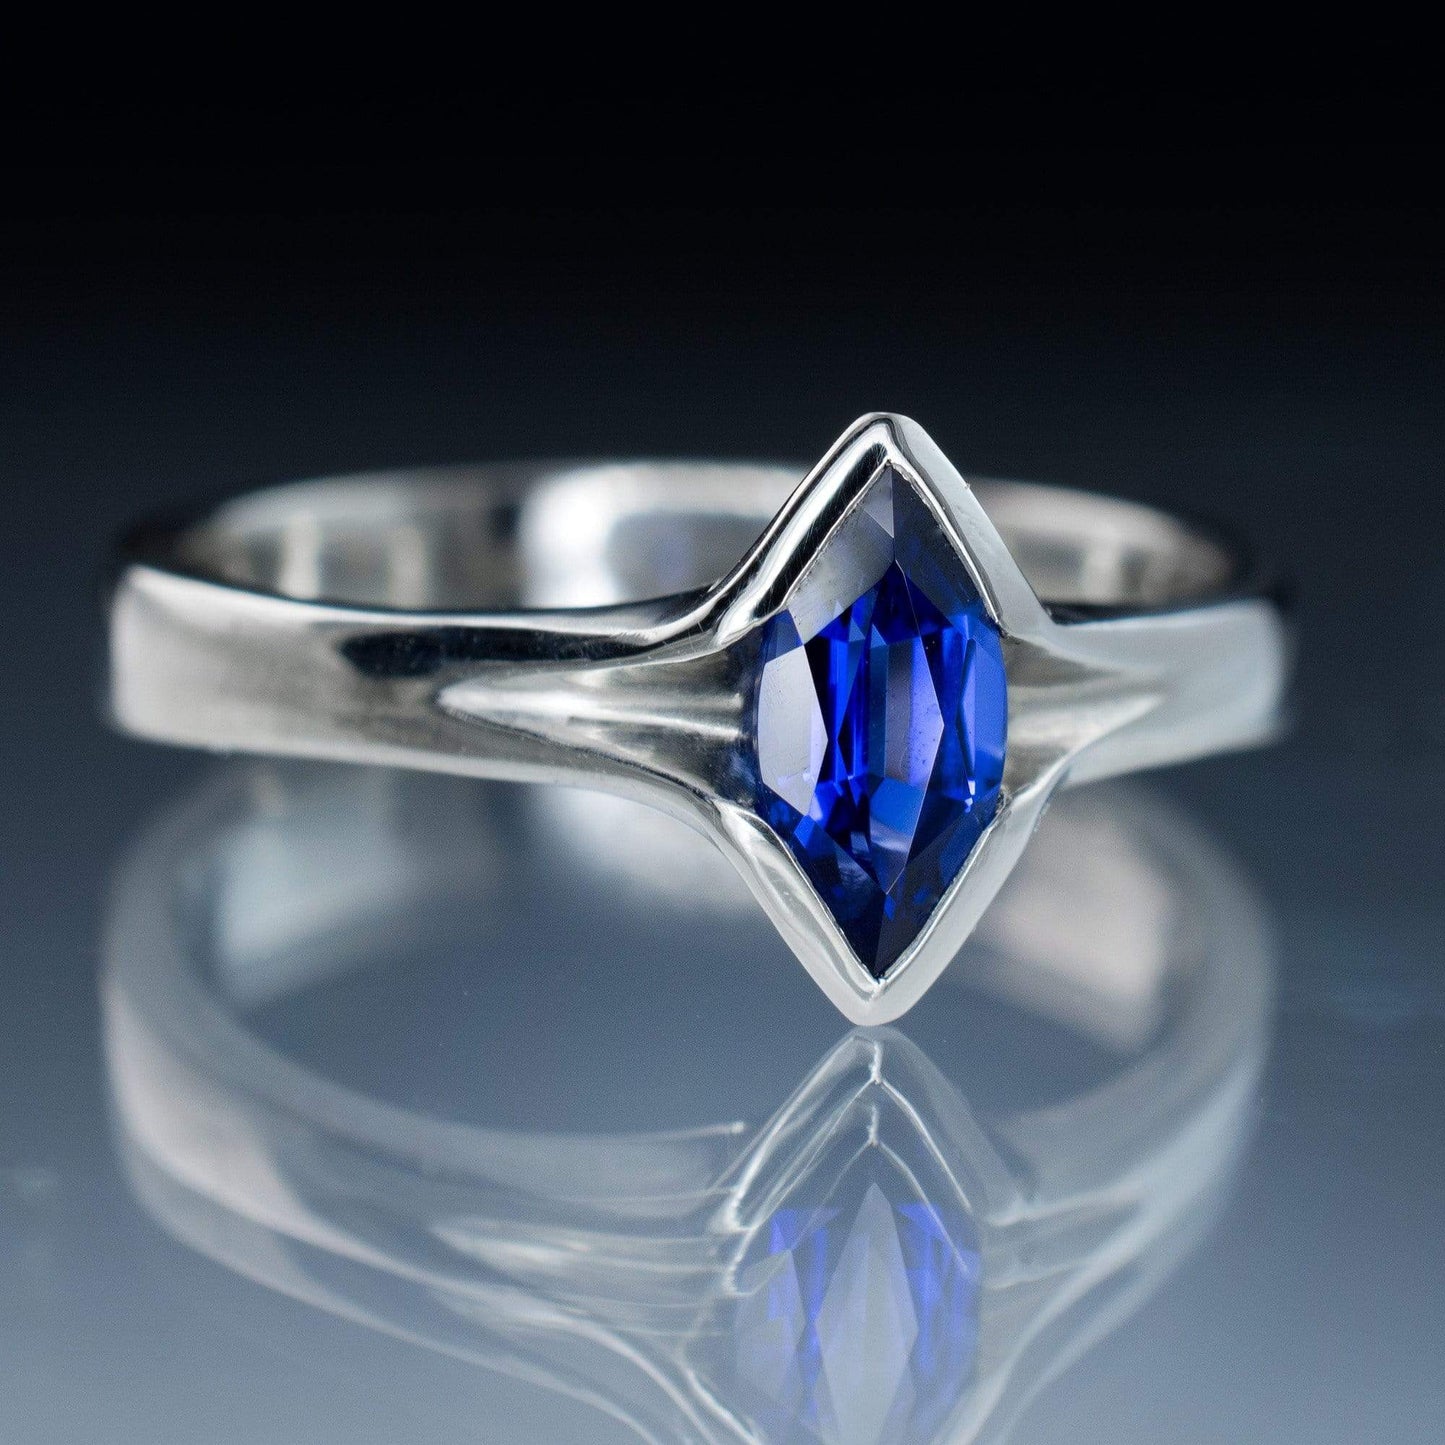 Chatham Marquise Blue Sapphire Semi-Bezel Solitaire Engagement Ring 7x3.5mm / 18kPD White Gold Ring by Nodeform